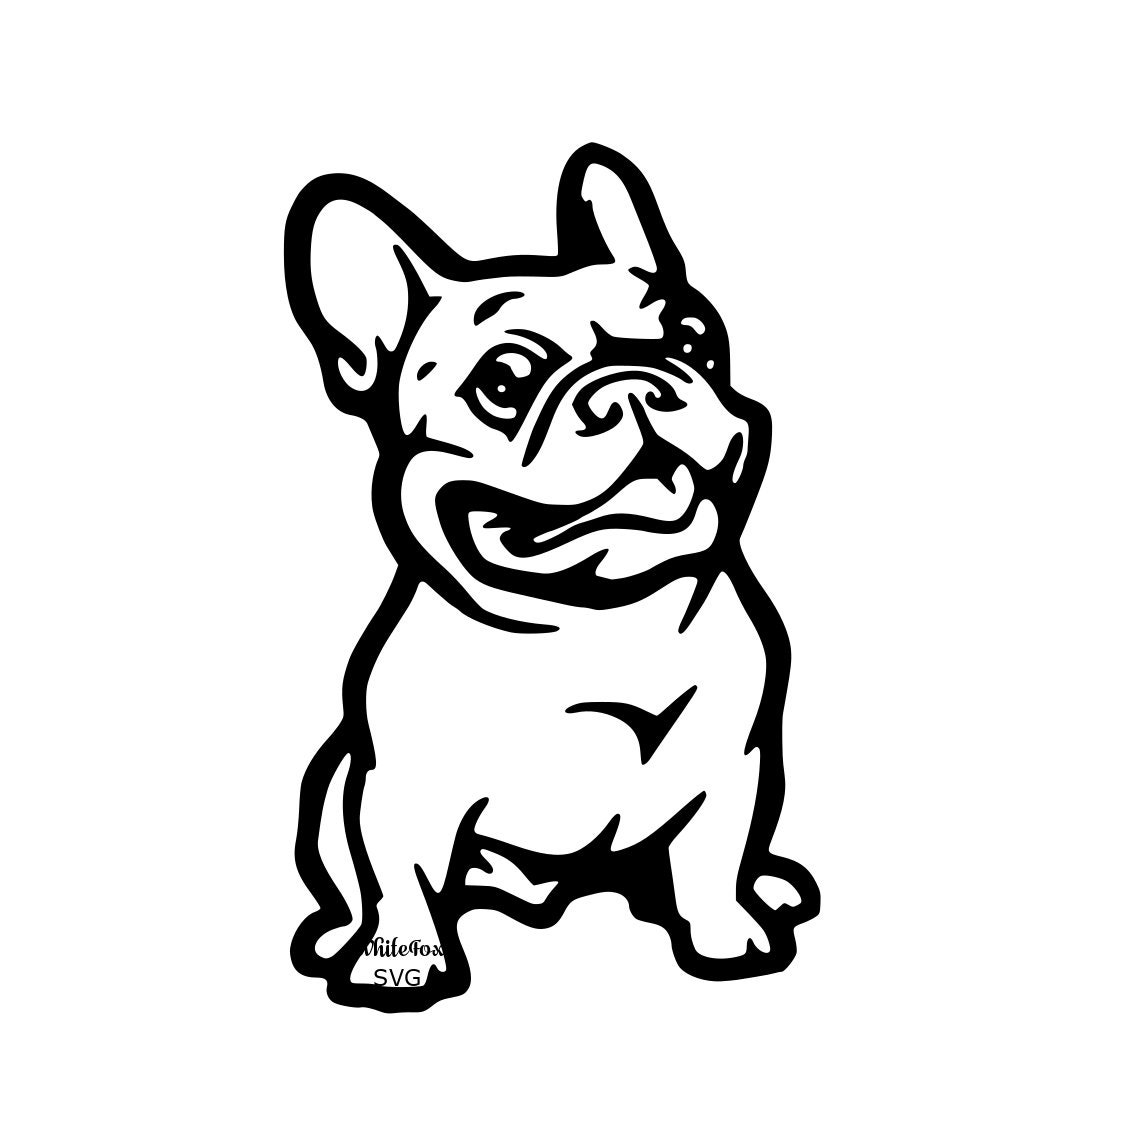 express pug template examples